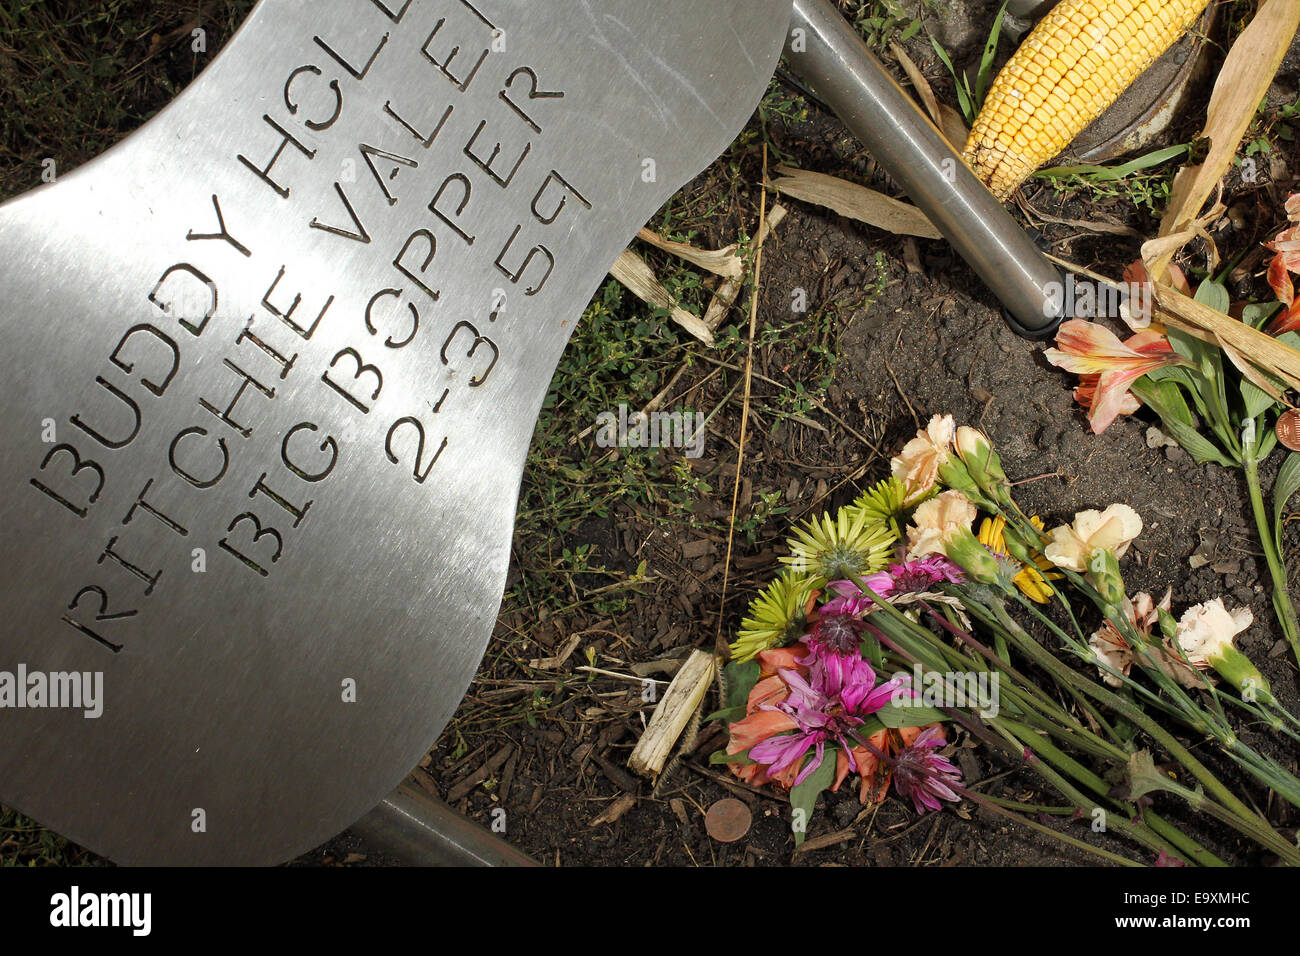 Clear Lake, IOWA, USA. 5th Oct, 2014. Flowers at a memorial at the spot where the plane carrying Buddy Holly, Ritchie Valens and J.P. ''The Big Bopper'' Richardson crashed killing all aboard on Feb. 3, 1959, North of Clear Lake, Iowa. The three young singers were in a single-engine aircraft flying in a light snowstorm in 1959 when the pilot apparently lost control. Holly decided to fly because his tour bus was having heating problems. © Kevin E. Schmidt/ZUMA Wire/Alamy Live News Stock Photo